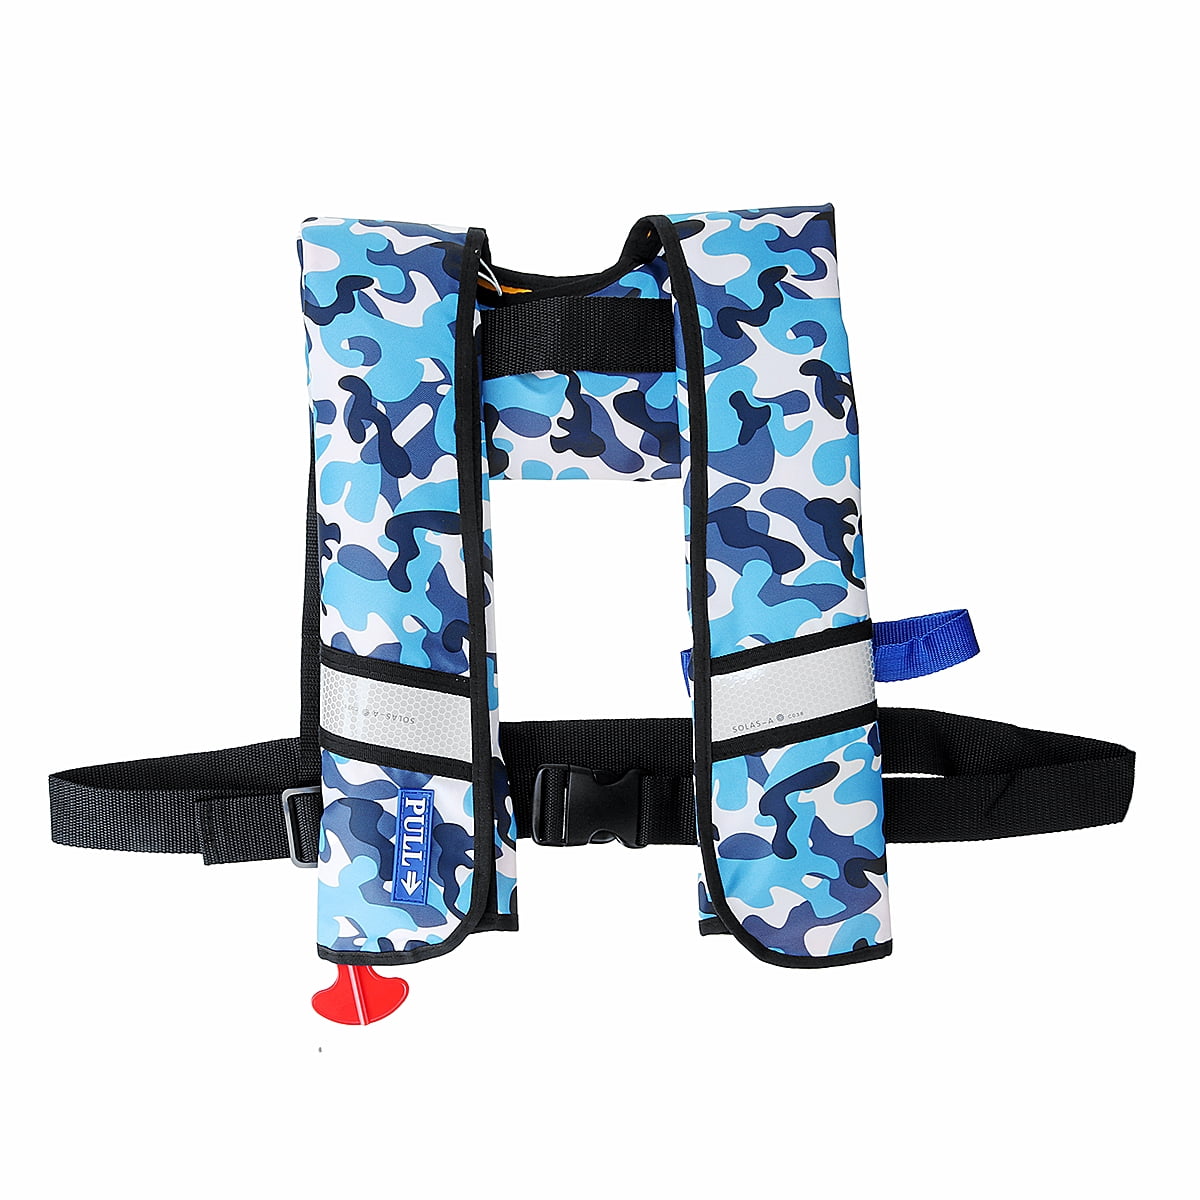 Daiseanuo Pro Fishing Auto Inflatable Life Jacket with Pocket